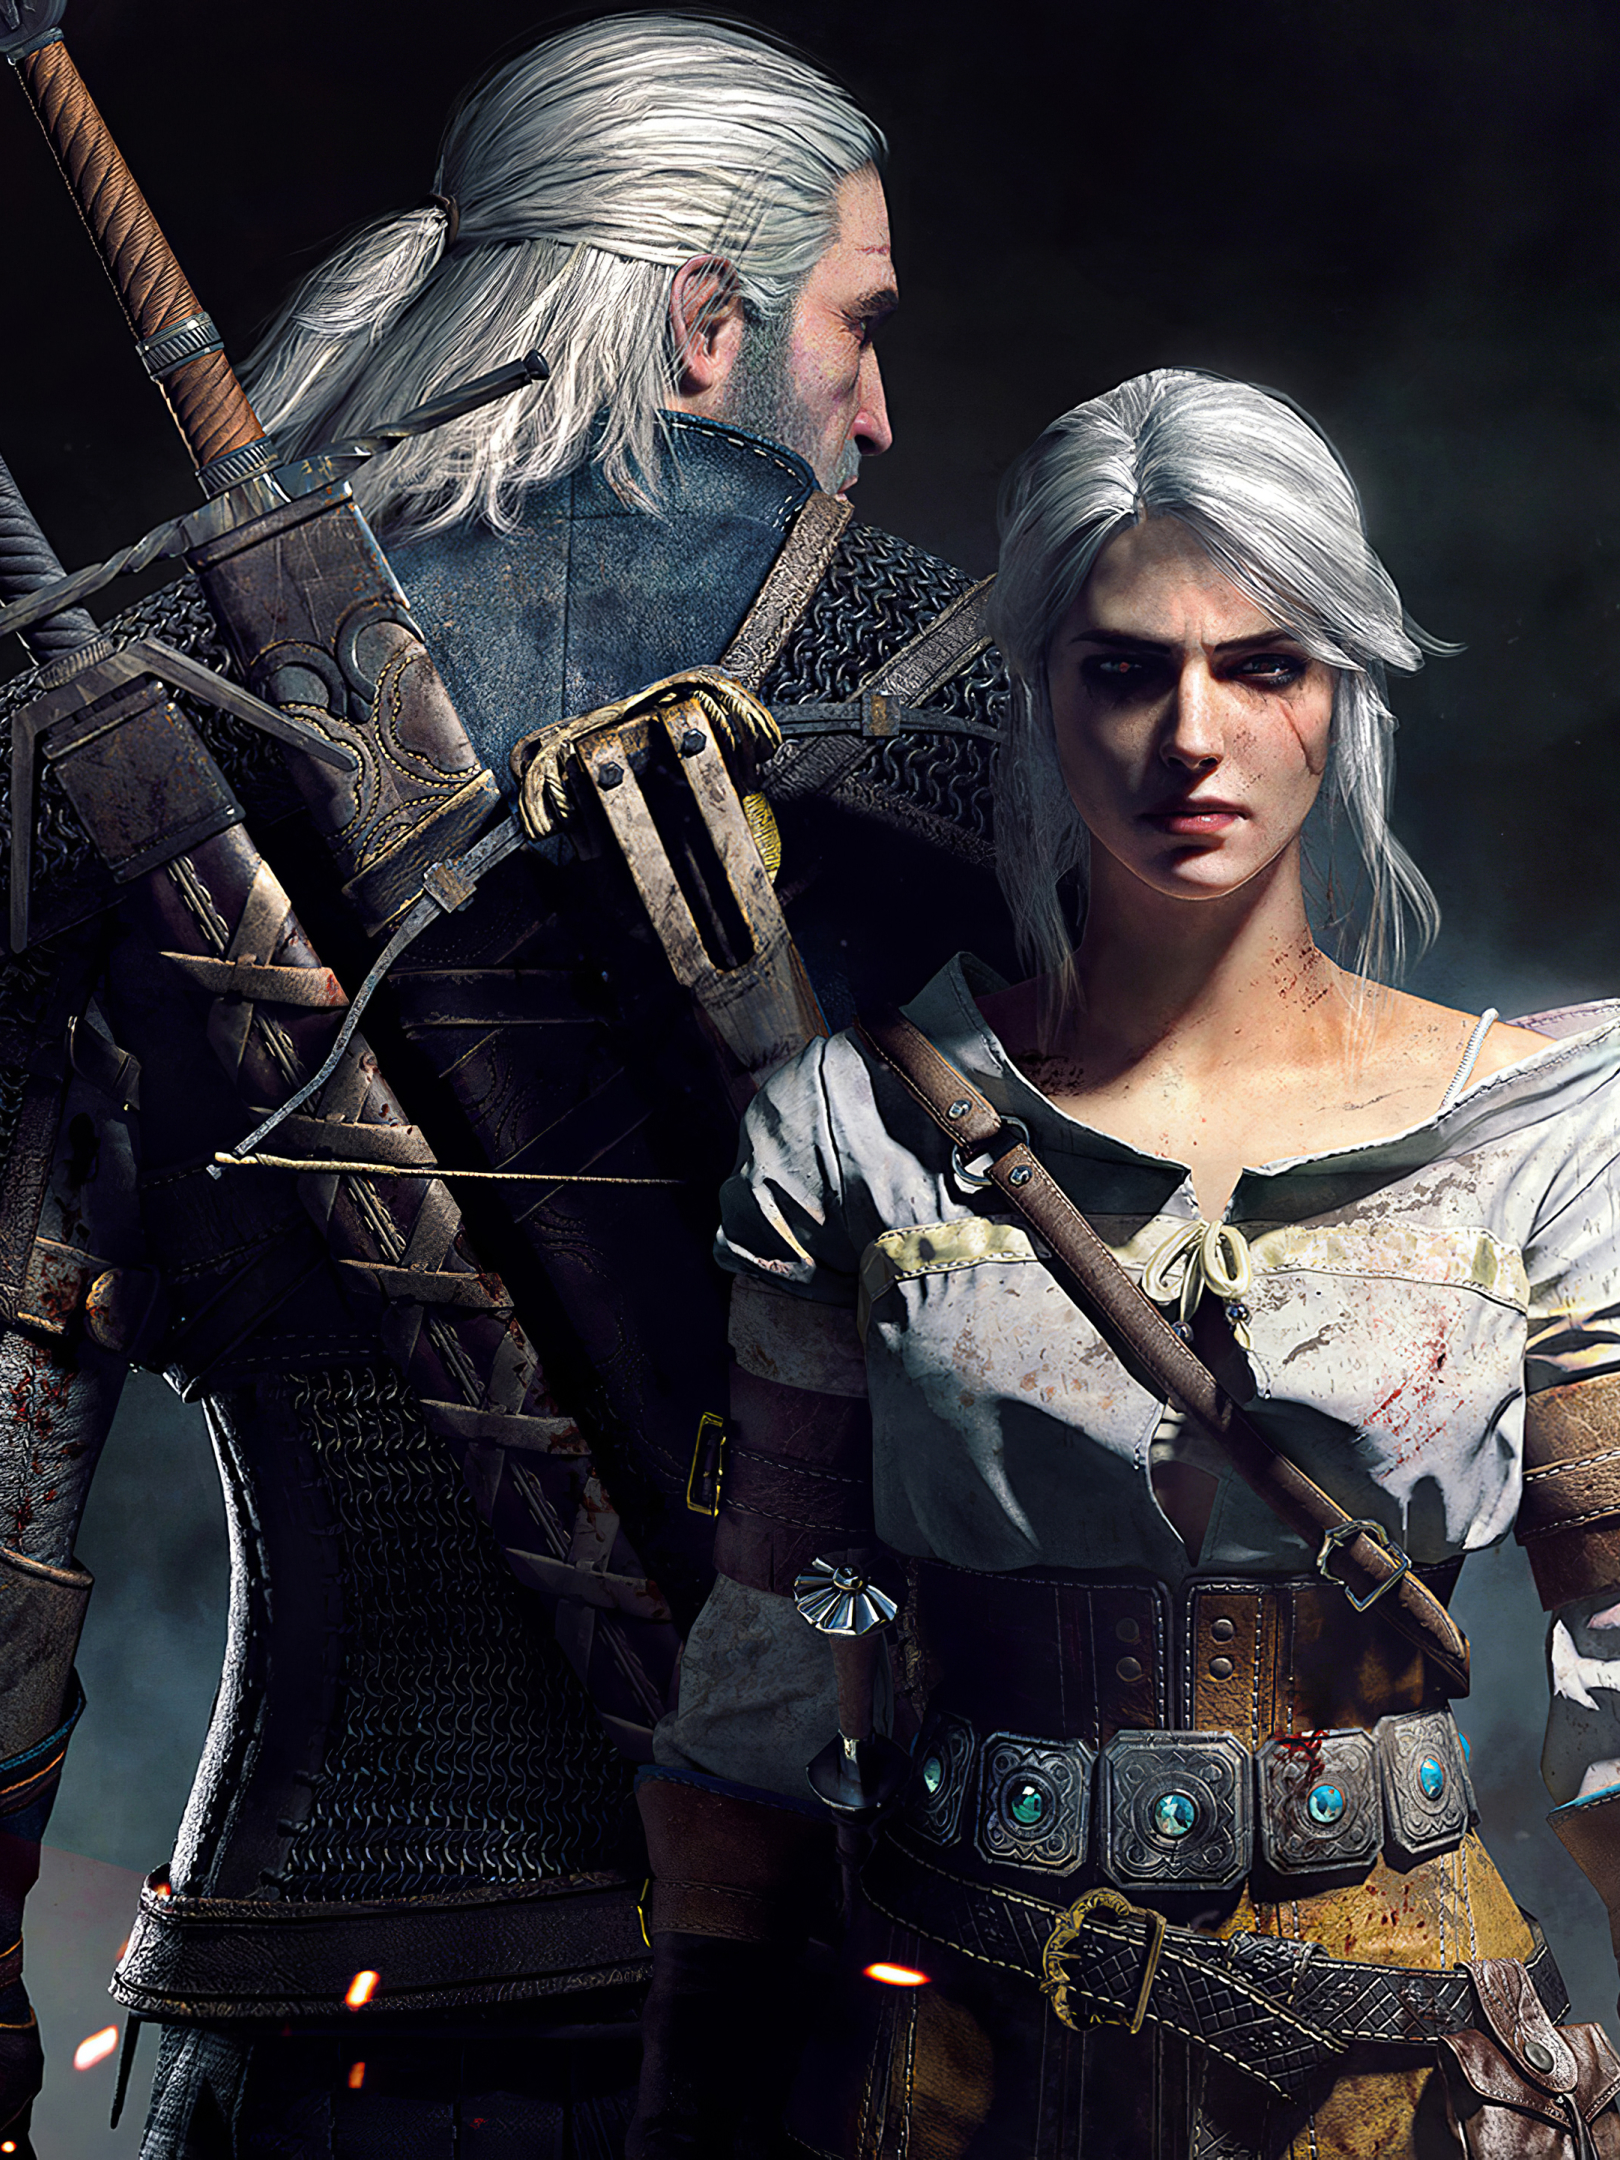 16x2160 Geralt And Ciri The Witcher 3 Game Poster 16x2160 Resolution Wallpaper Hd Games 4k Wallpapers Images Photos And Background